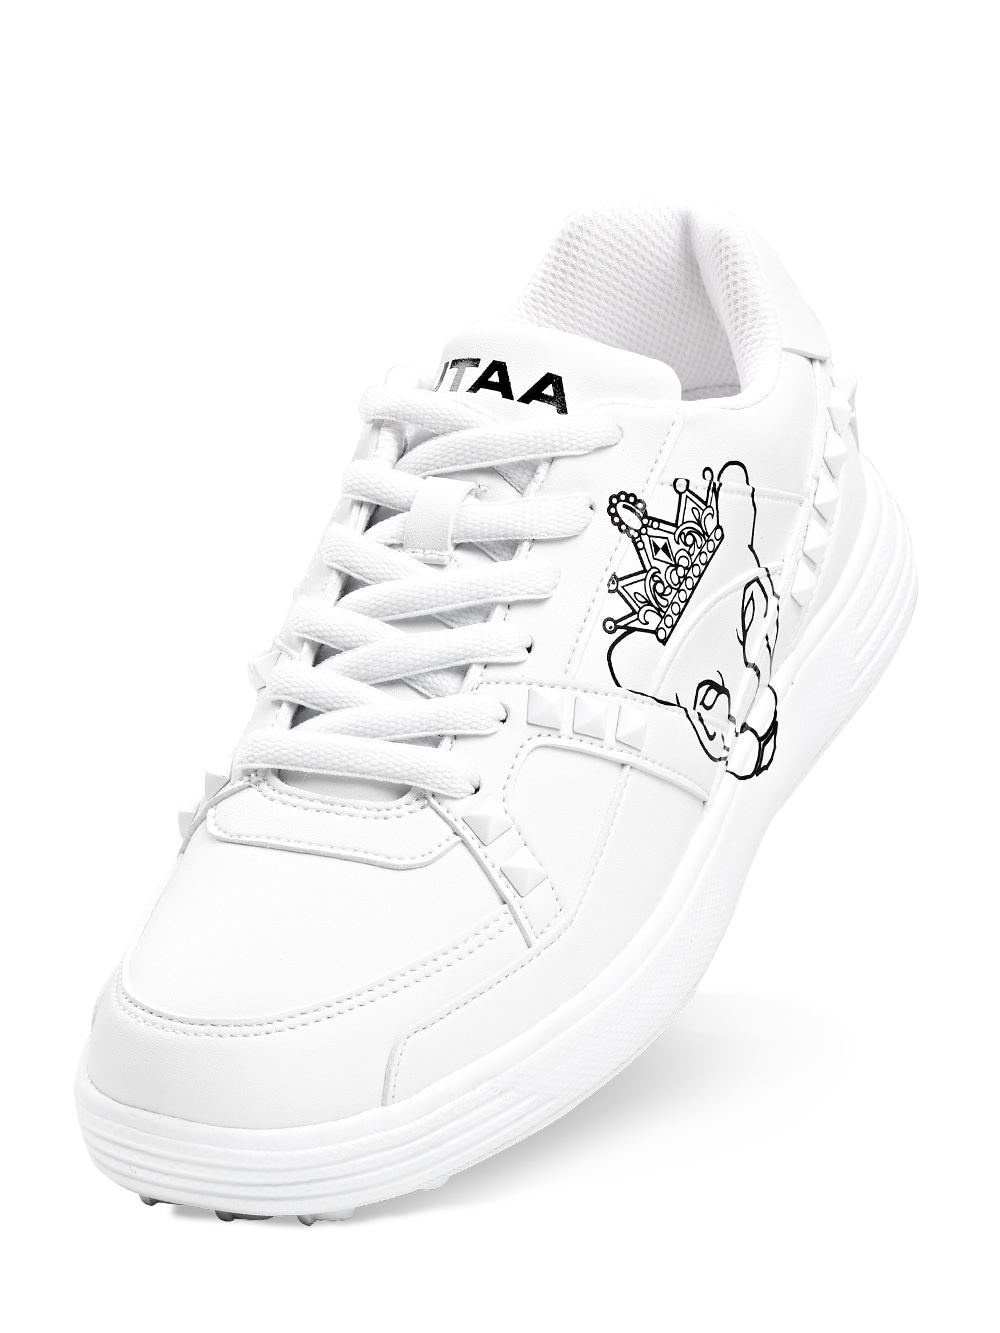 UTAA Crown Panther Golf Sneakers : Women&#039;s (UC0GHF102WH)